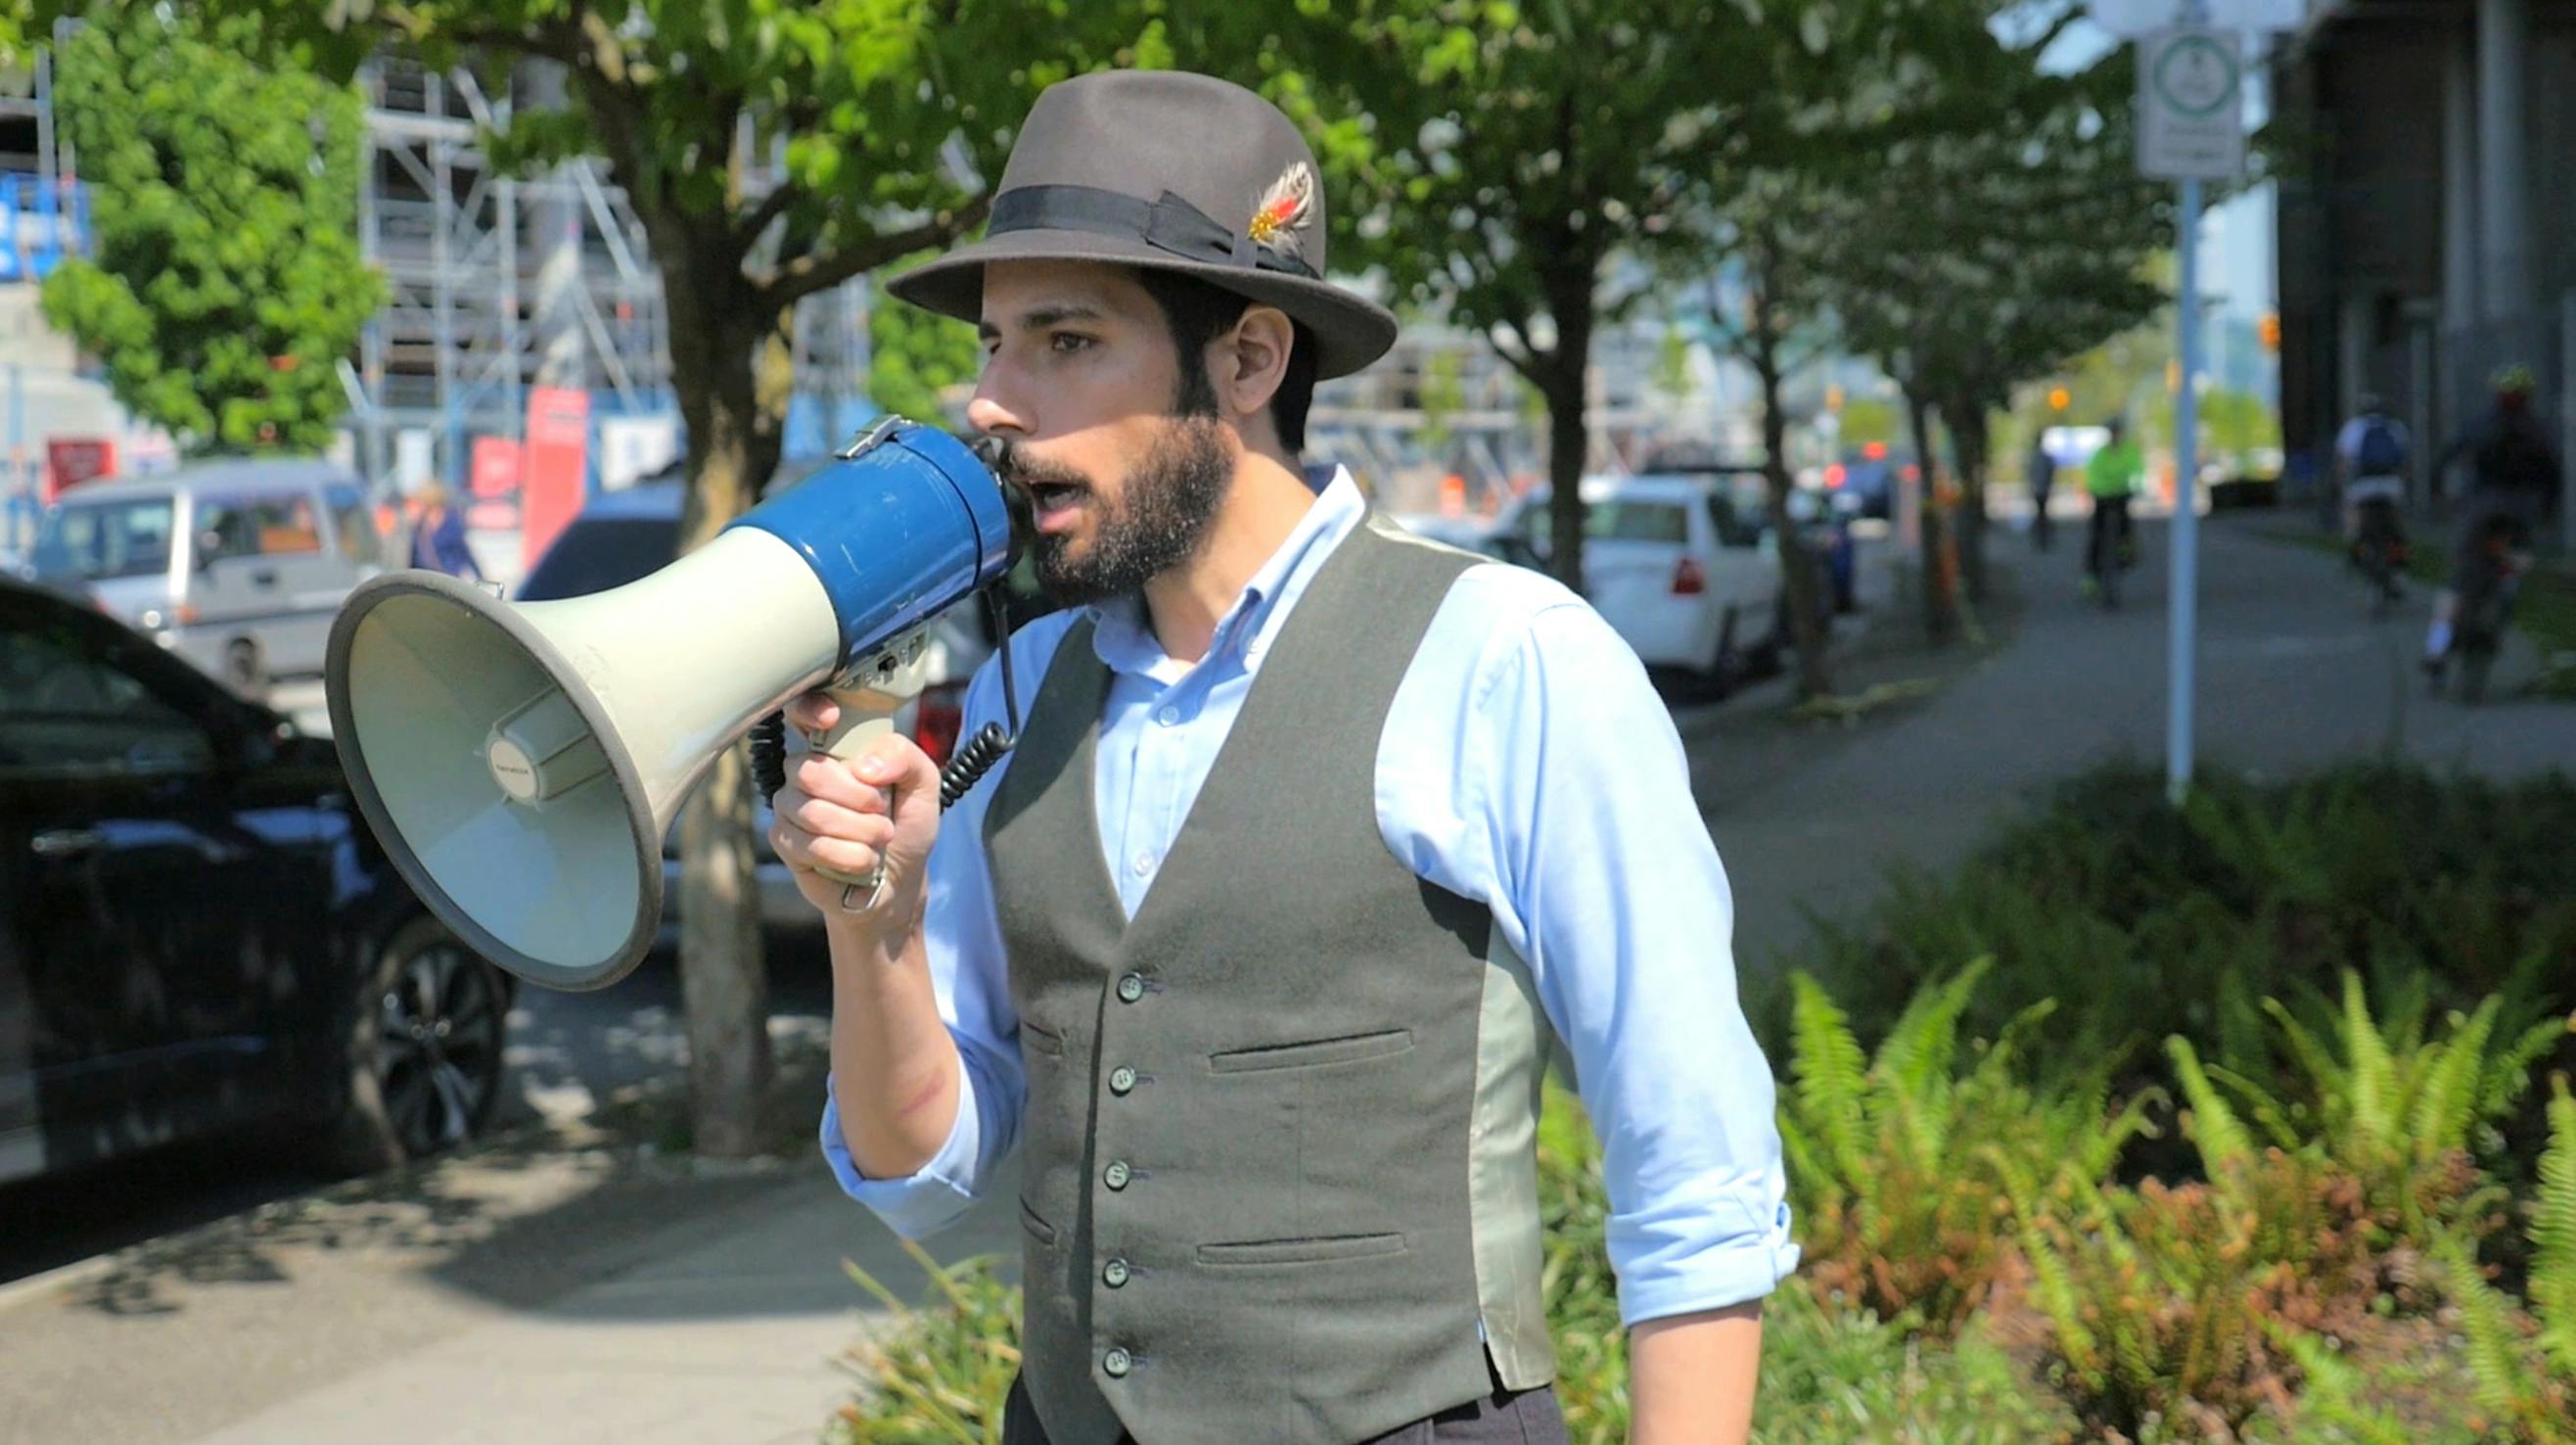 A photograph of Carmen Papalia speaking into a white megaphone on a street. 